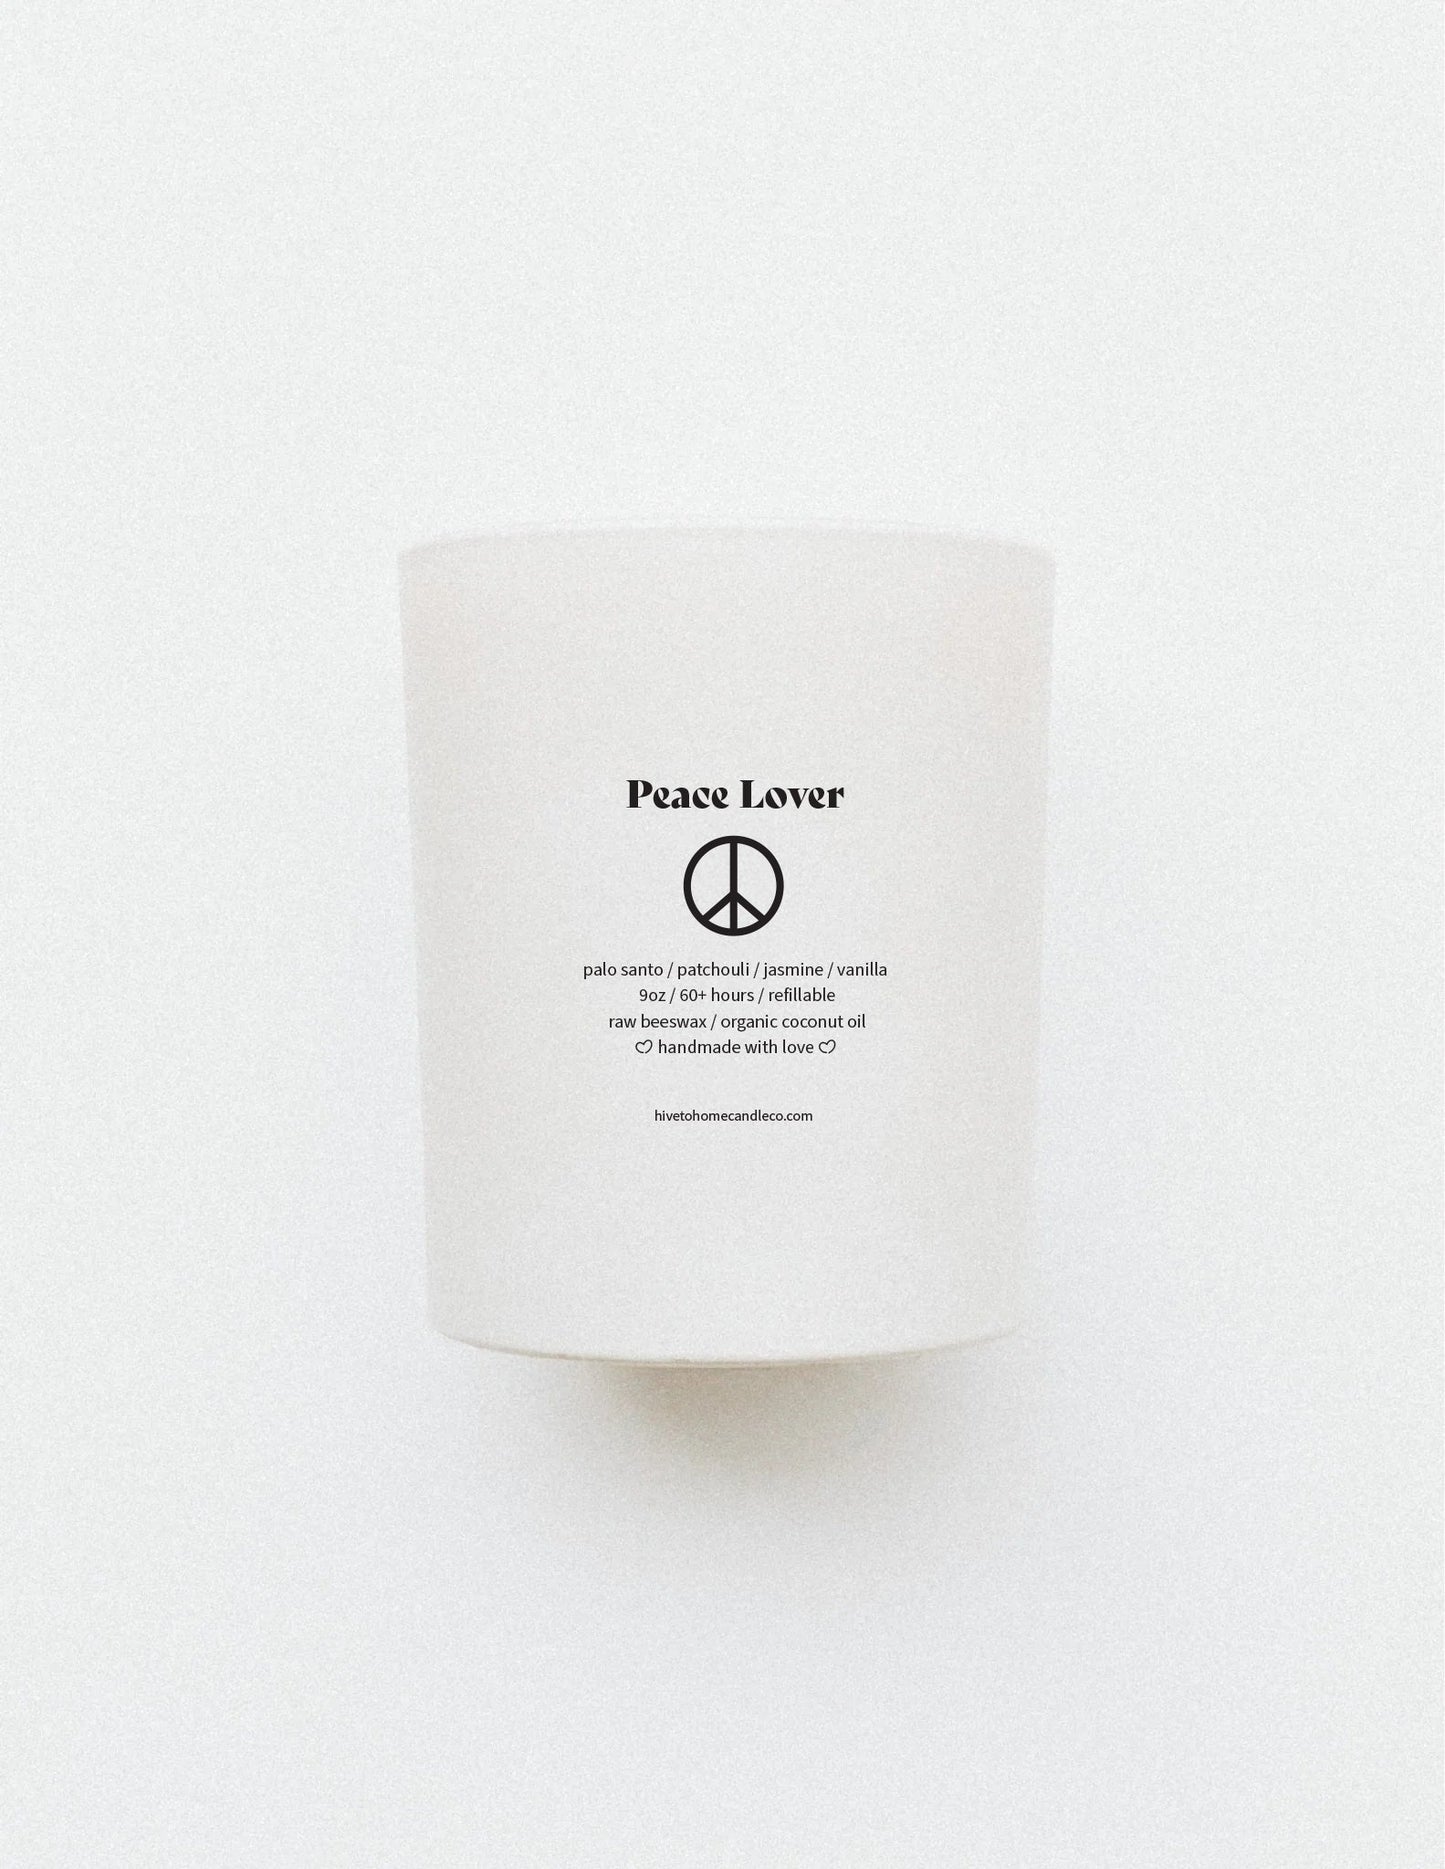 peace lover, palo santo and patchouli scented candle with hints of jasmine and vanilla. refillable beeswax candle